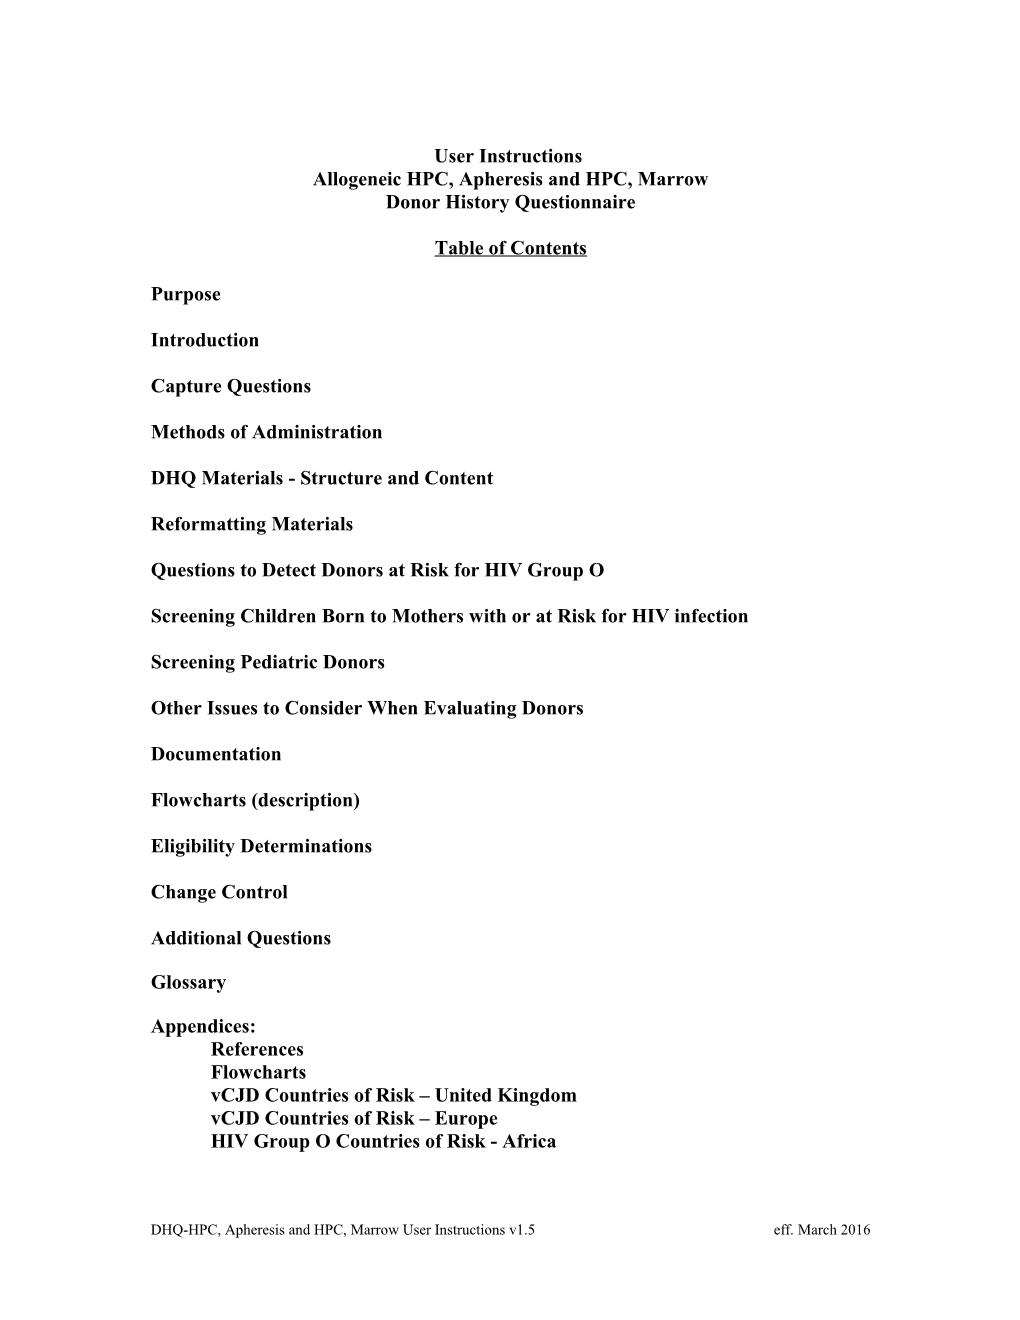 HPC, Apheresis and HPC, Marrow DHQ Version 1.5, March 2016 User Instructions